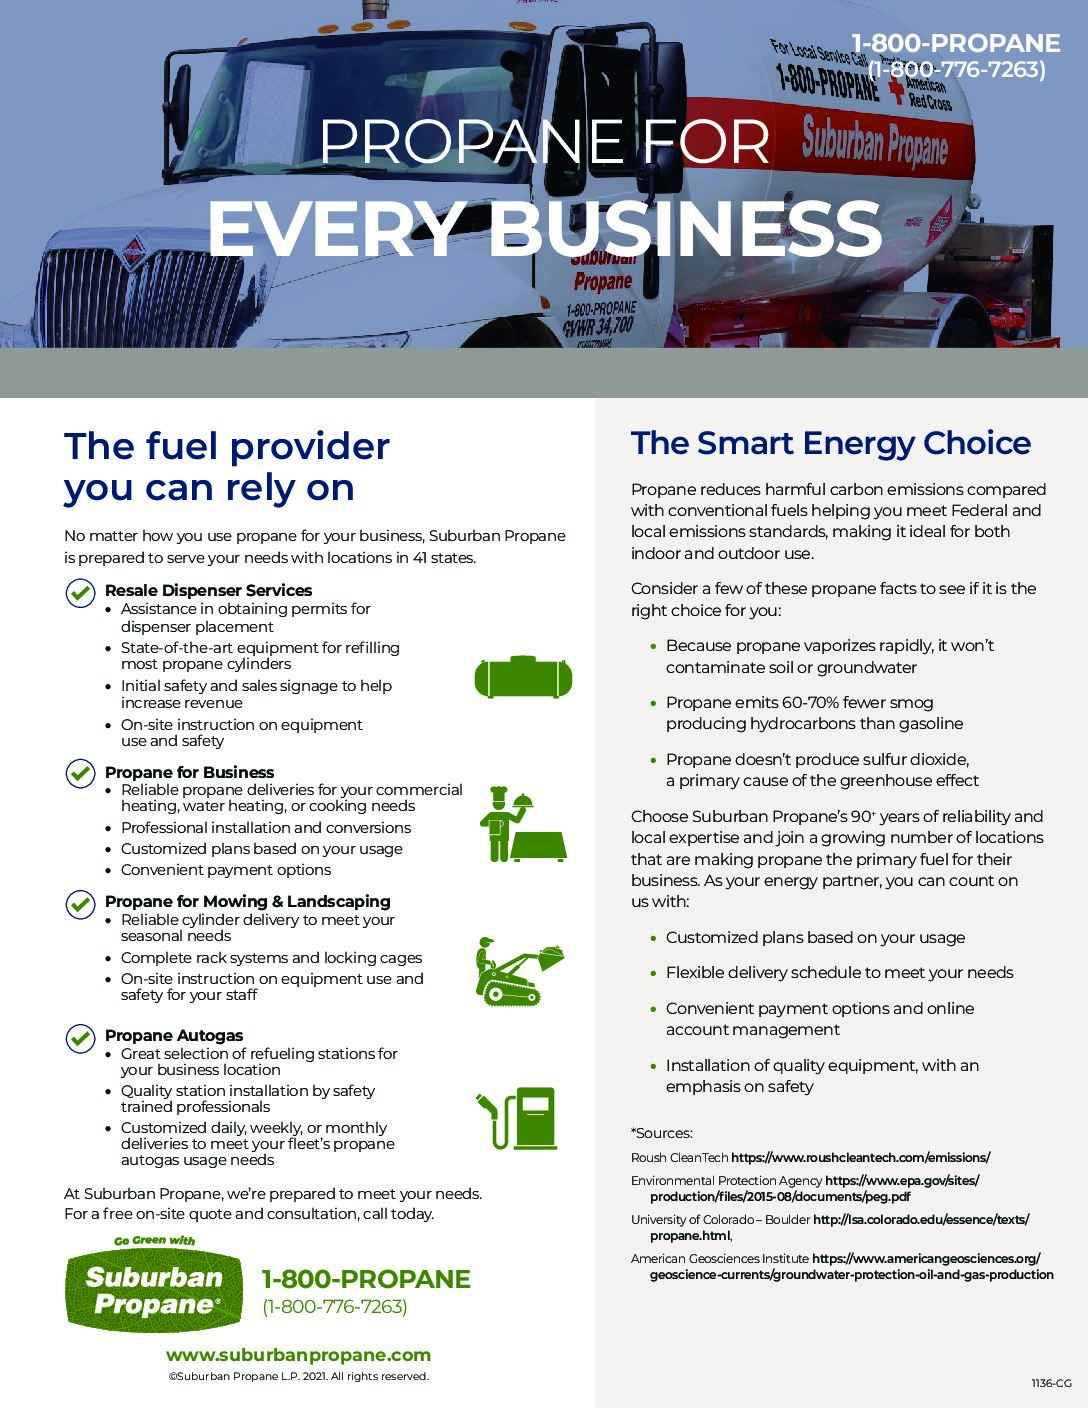 propane for every business PDF image